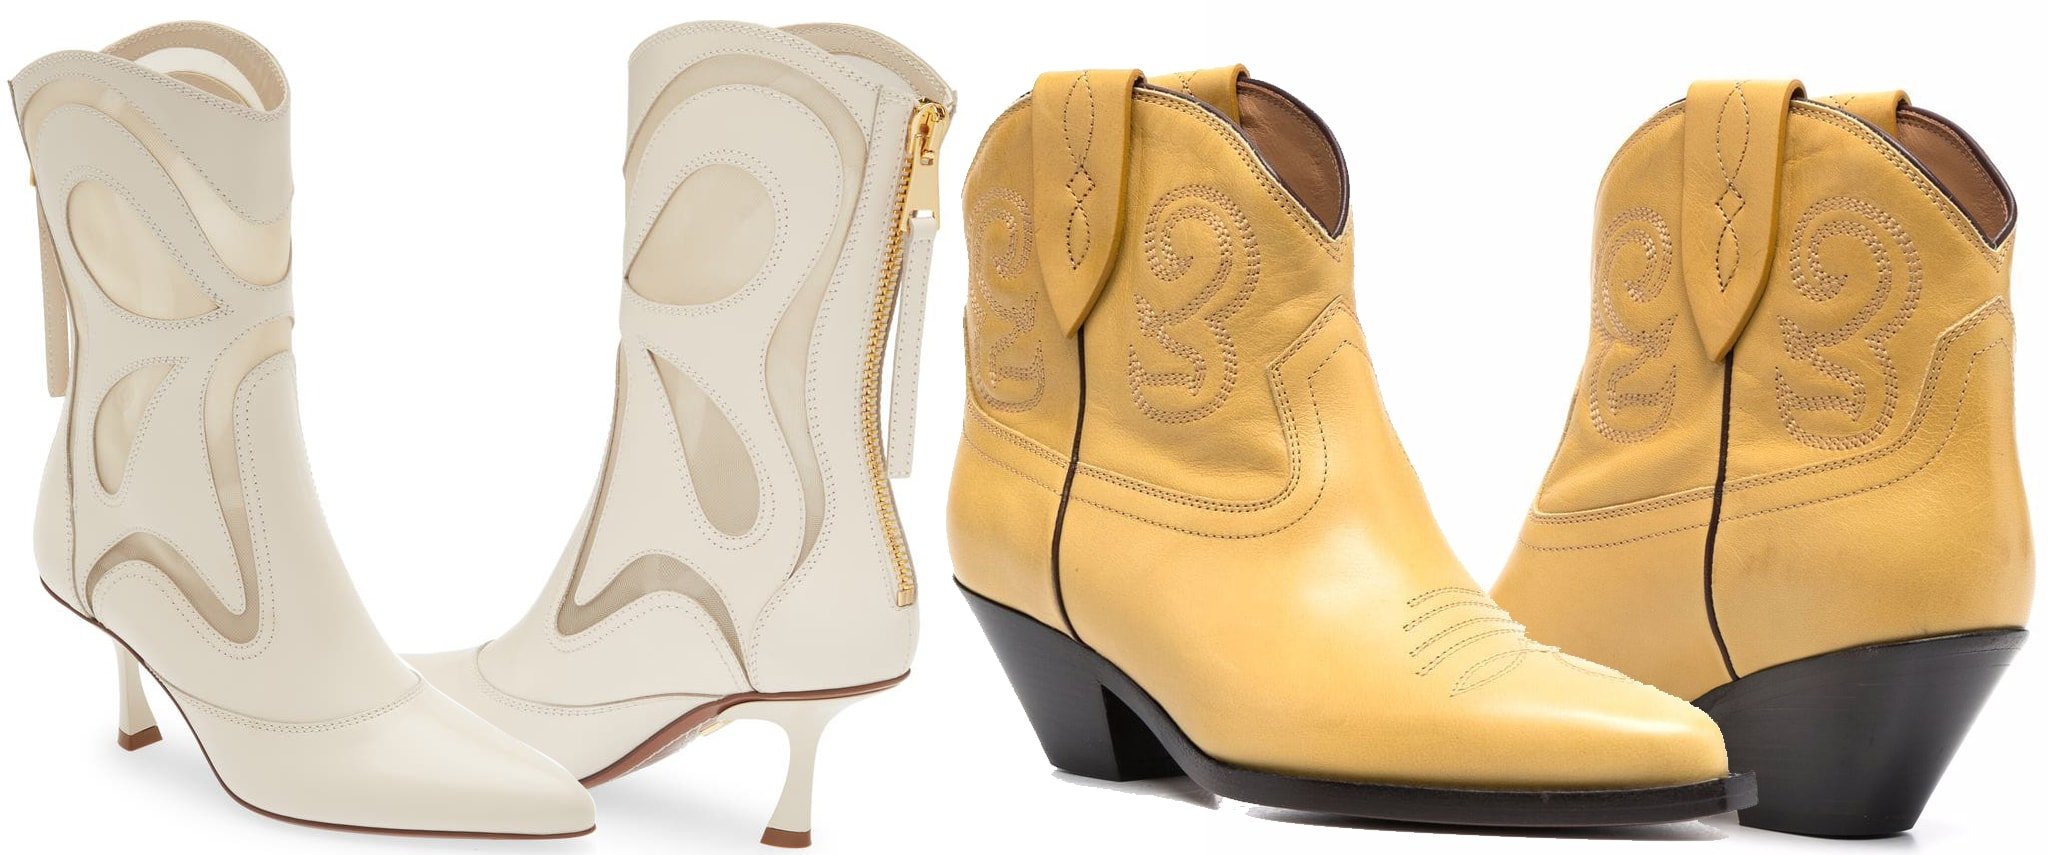 Zimmermann Butterfly Patchwork Western Boots; Isabel Marant Legan Leather Ankle Boots